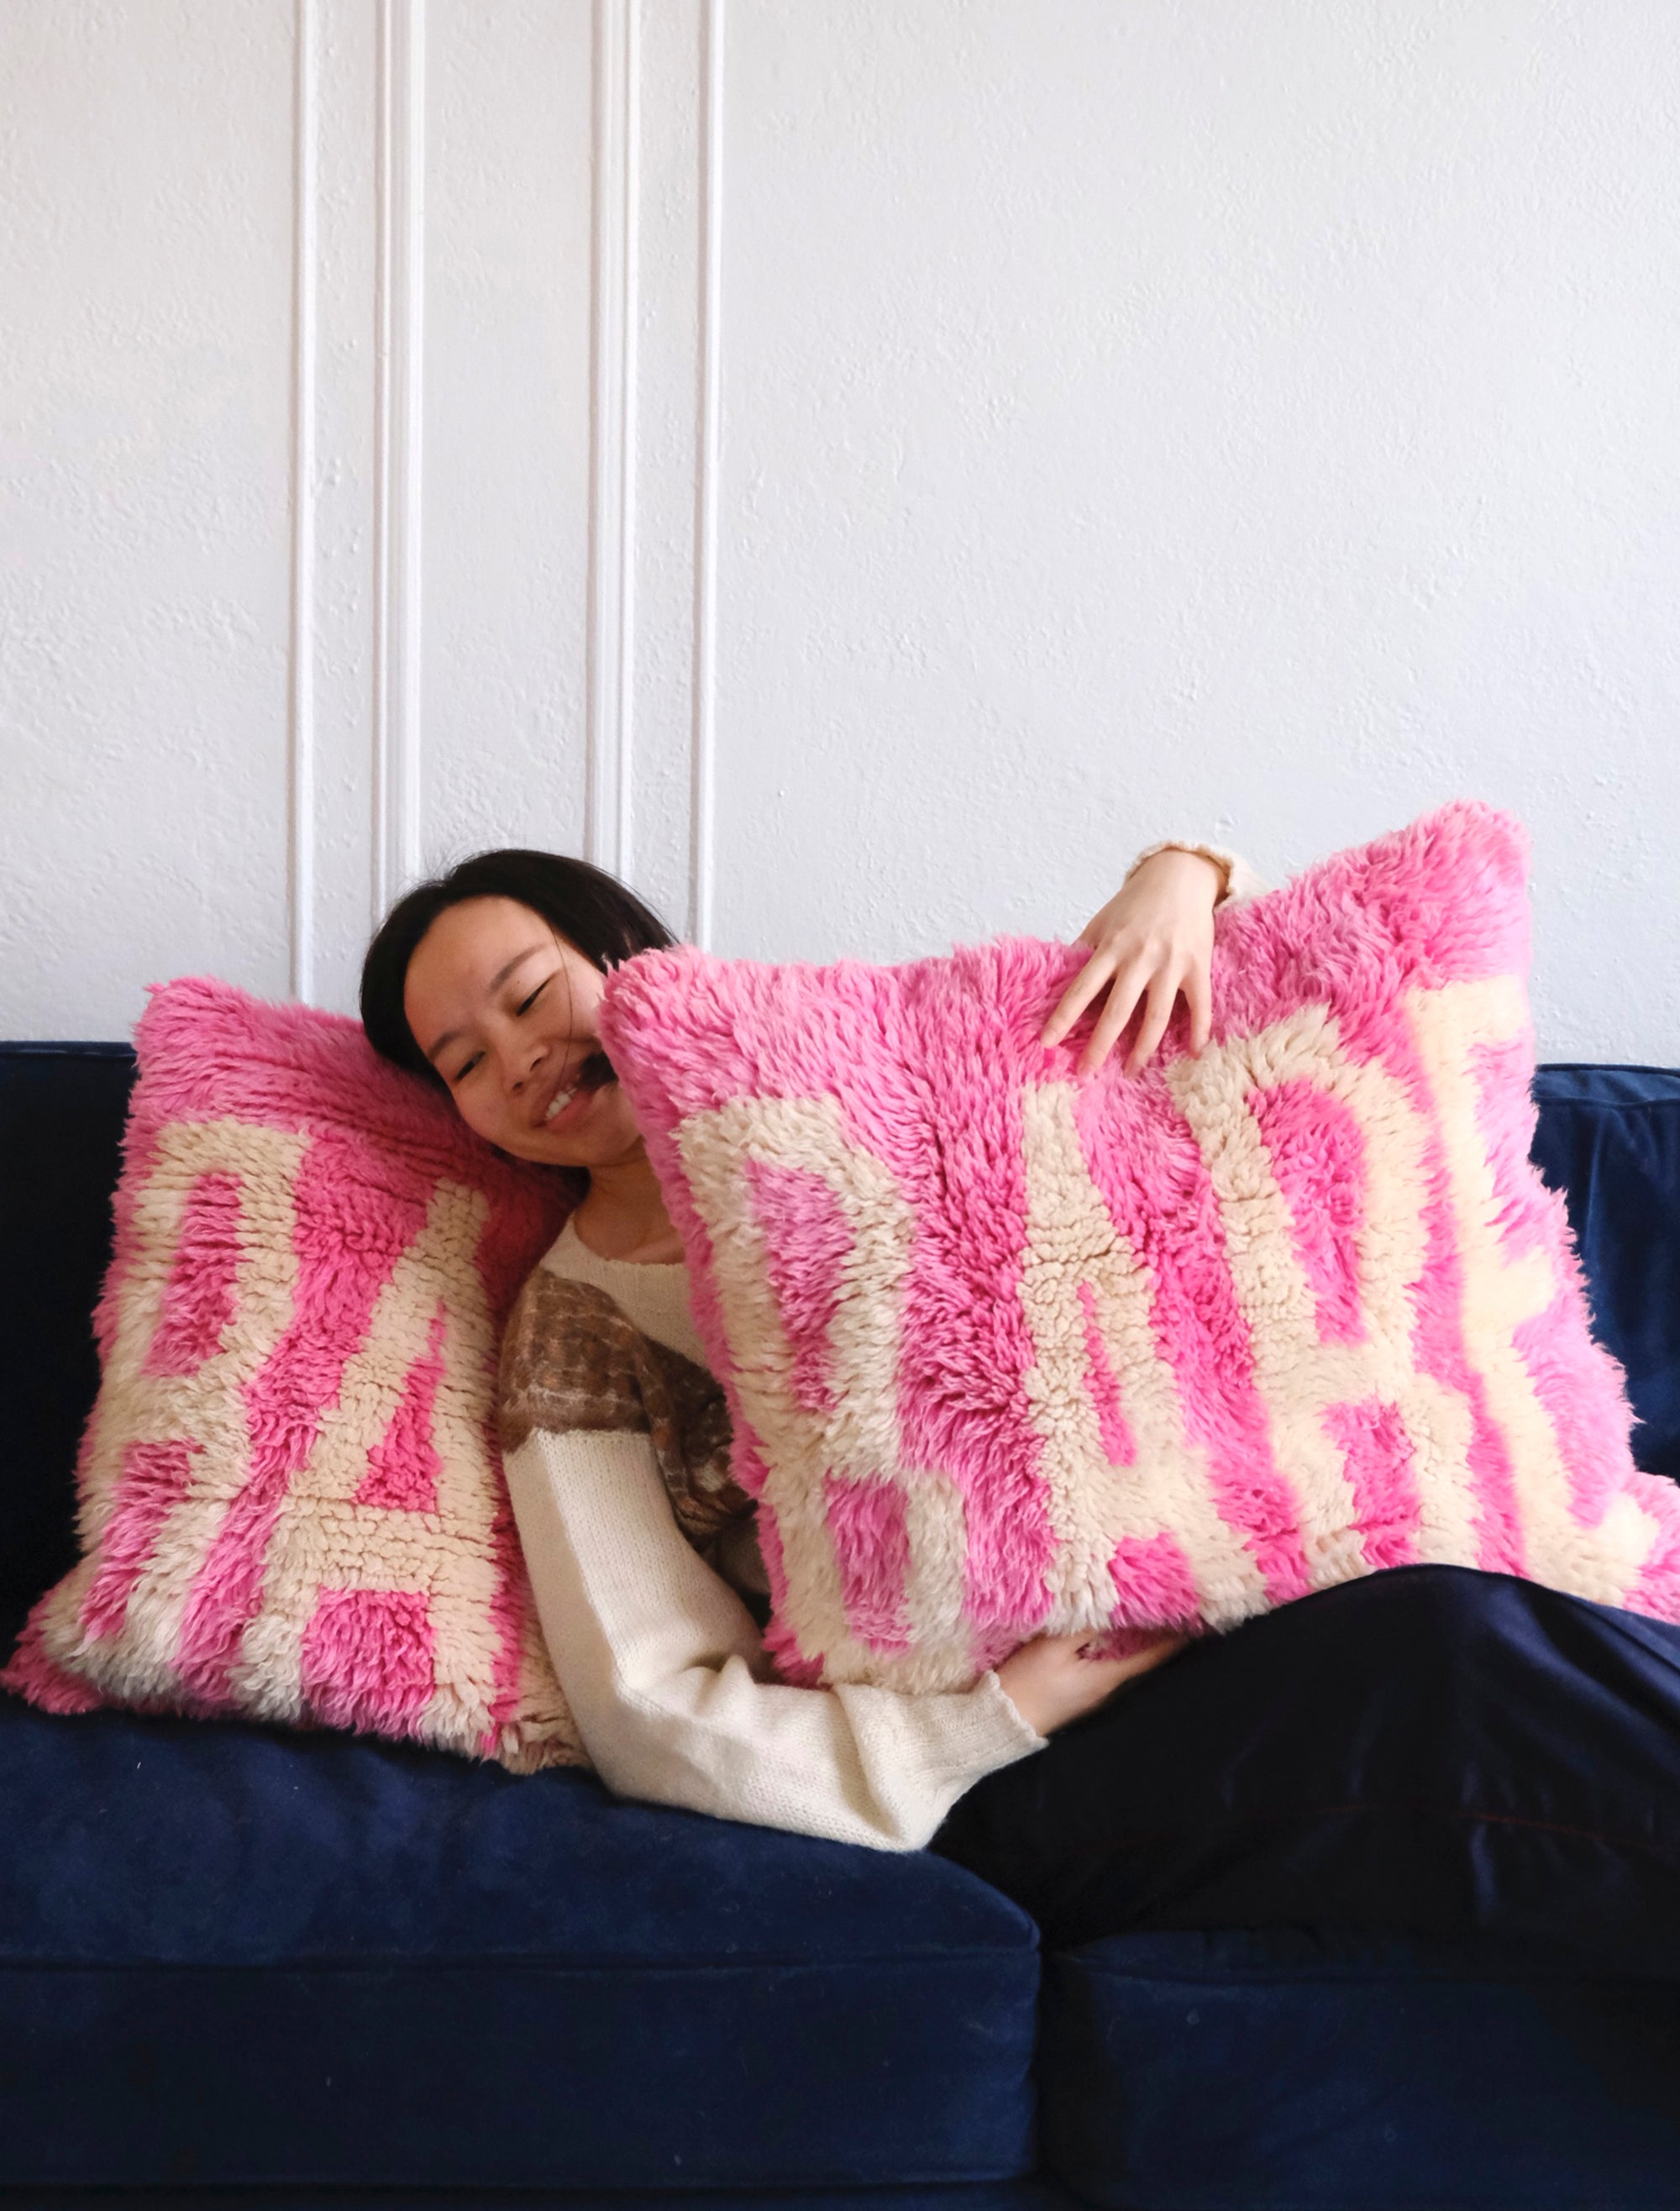 Meet our latest cushion made from a Beni Mrirt rug. Vibrant neon pink, adorned with the word "BABE" in white yarn, this 55x55cm delight effortlessly infuses joy into any space. It's not just decor; it's a celebration of style and comfort. Watch your room bloom with the playful charm of "Babe in Bloom," a vivid testament to the power of color and design.